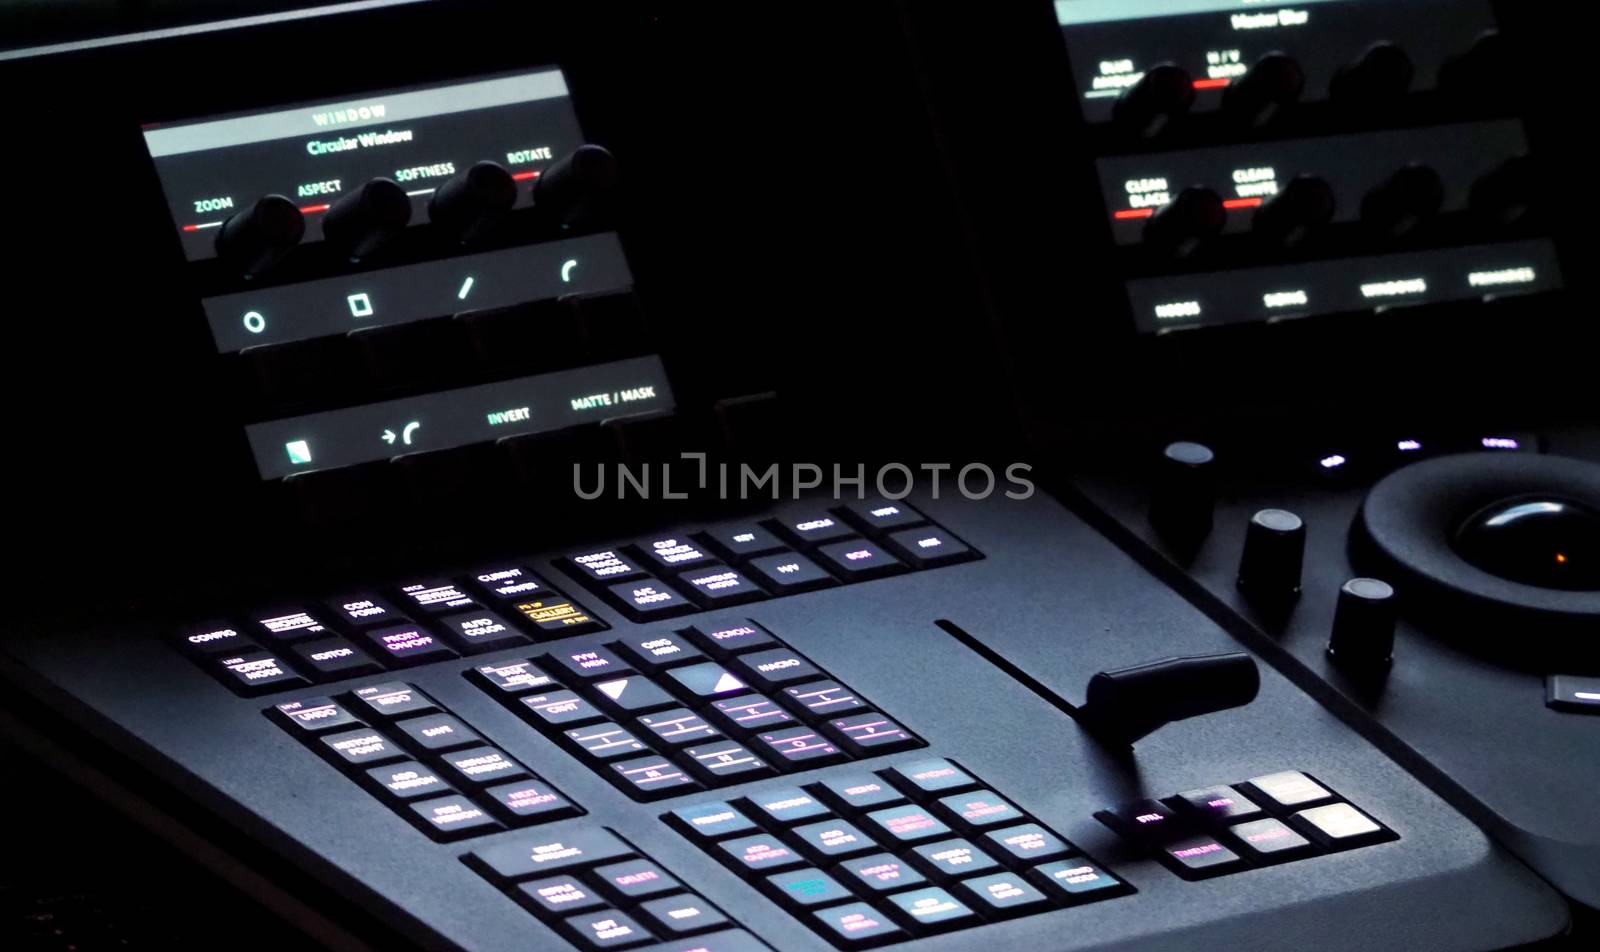 Blurry images of telecine controller machine  by gnepphoto